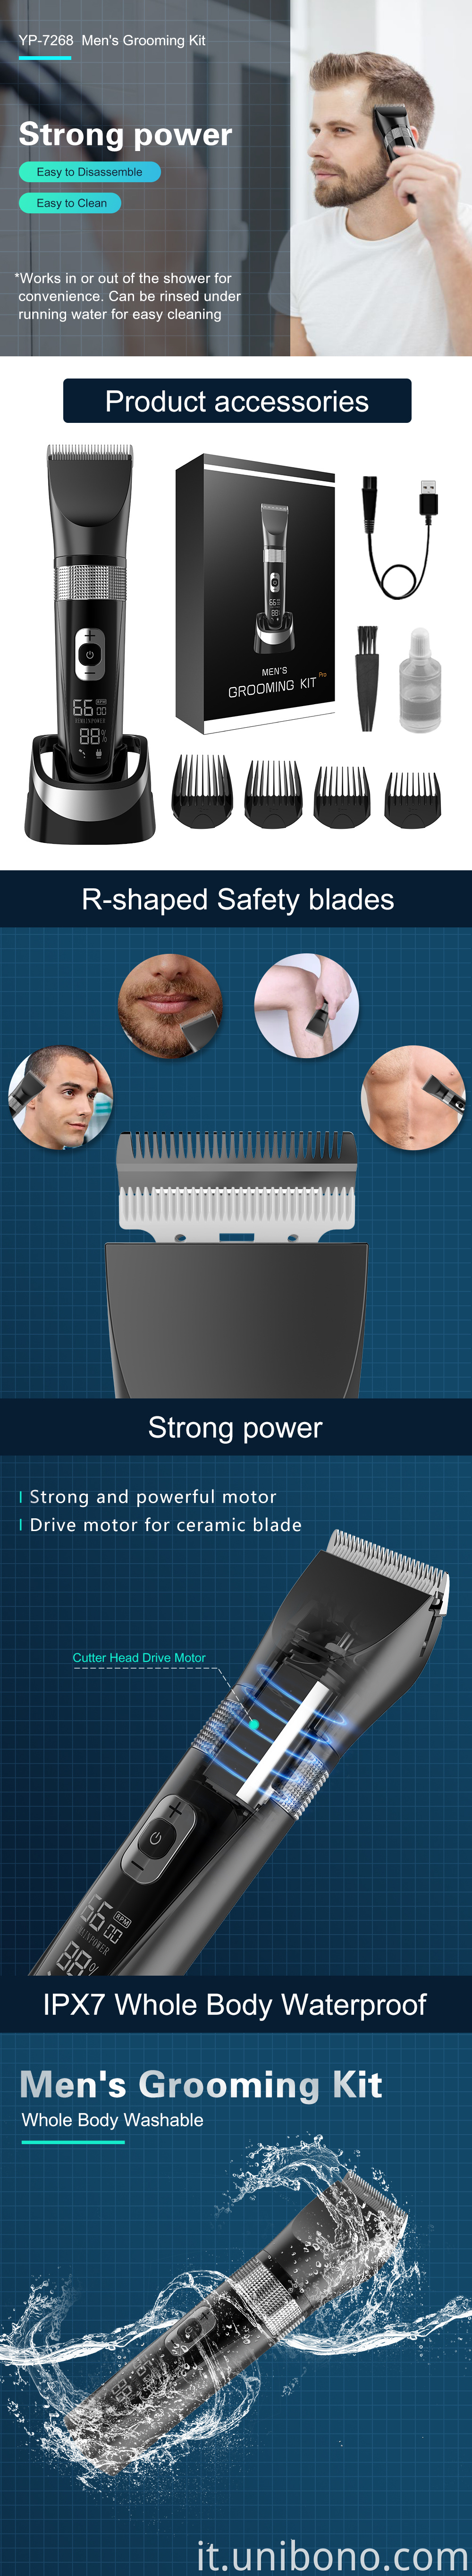 Low Noise Rechargeable Electric Hair Clipper and Trimmerer： 7268 Operation： Corded And Cordless Operation Blade Material： Stainless Blade+Ceramic Blade Working Time： Over 70mins Product Size： 179X44X41mm Charging Time： Around 90mins Giftbox Size： 165X54X232mm Battery： Li-ion 3.7V 1200mAh Carton Size： 480X475X355mm(32pcs/ctn) Output： 5V/1A Certification： FCC/EMC/RoHS Waterproofing: IPX7 Speed： 5000rpm,5500rpm..To 7000rpm Adjustable Blade Length: 0.8, 1.0,1.2, 1.4, 1.6, 1.8mm Colour： Customized Comb： 3mm,6mm,9mm,12mm Charge Port USB